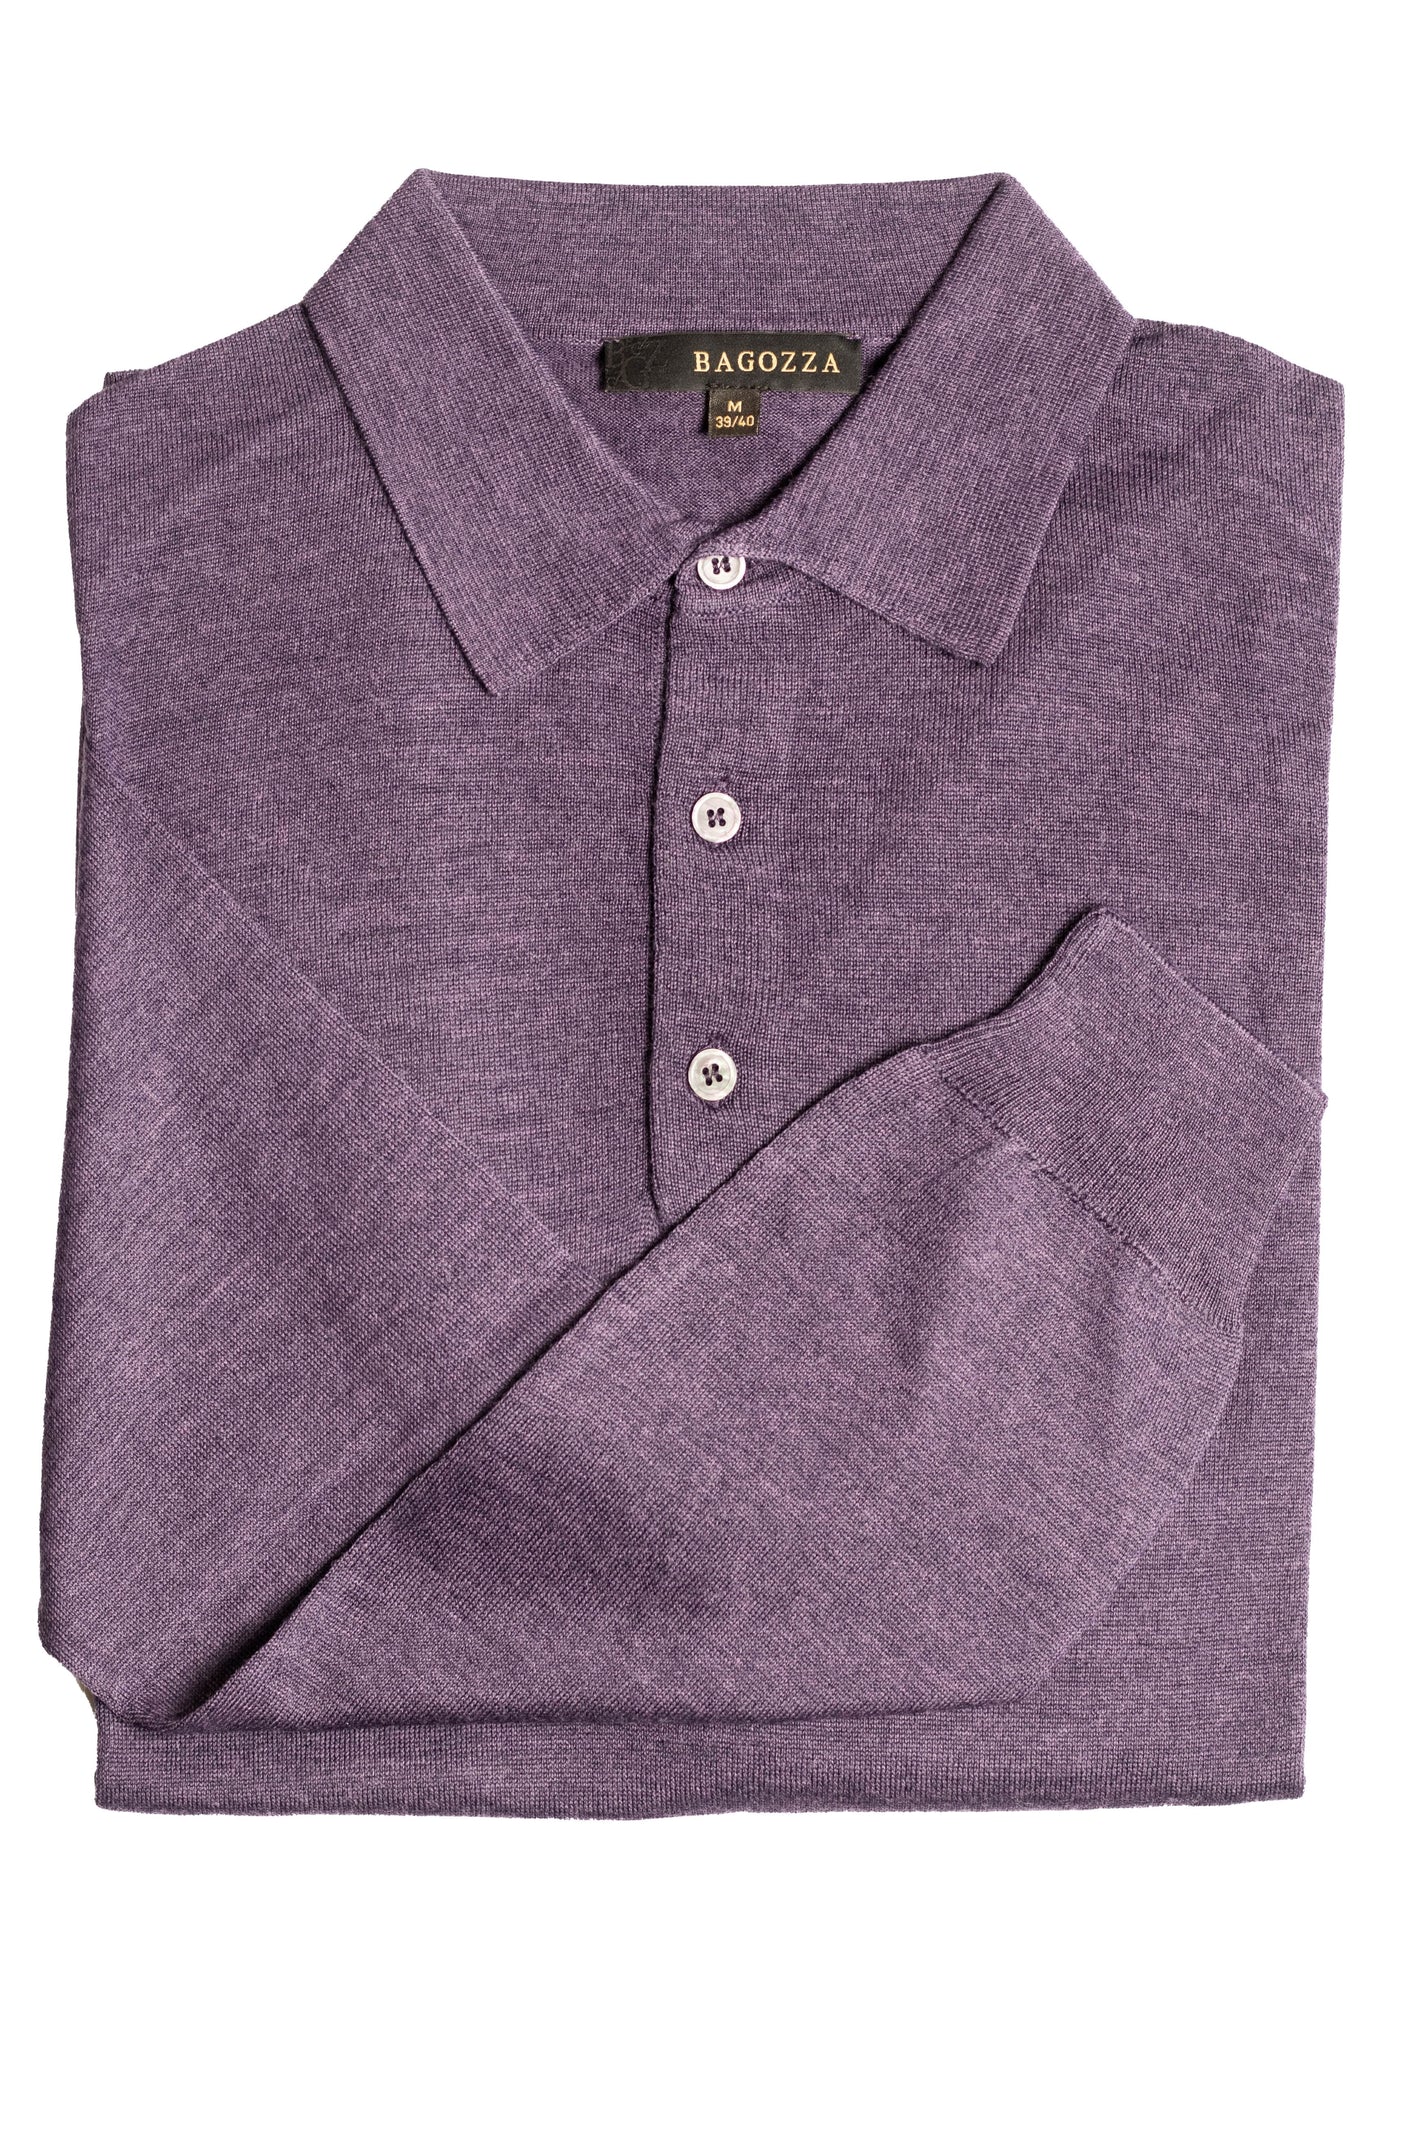 Men's Bagozza merino wool blend long-sleeve golf shirt with ribbing in purple (8370) - available in-store, 337 Monty Naicker Street, Durban CBD or online at Omar's Tailors & Outfitters online store.   A men's fashion curation for South African men - established in 1911.